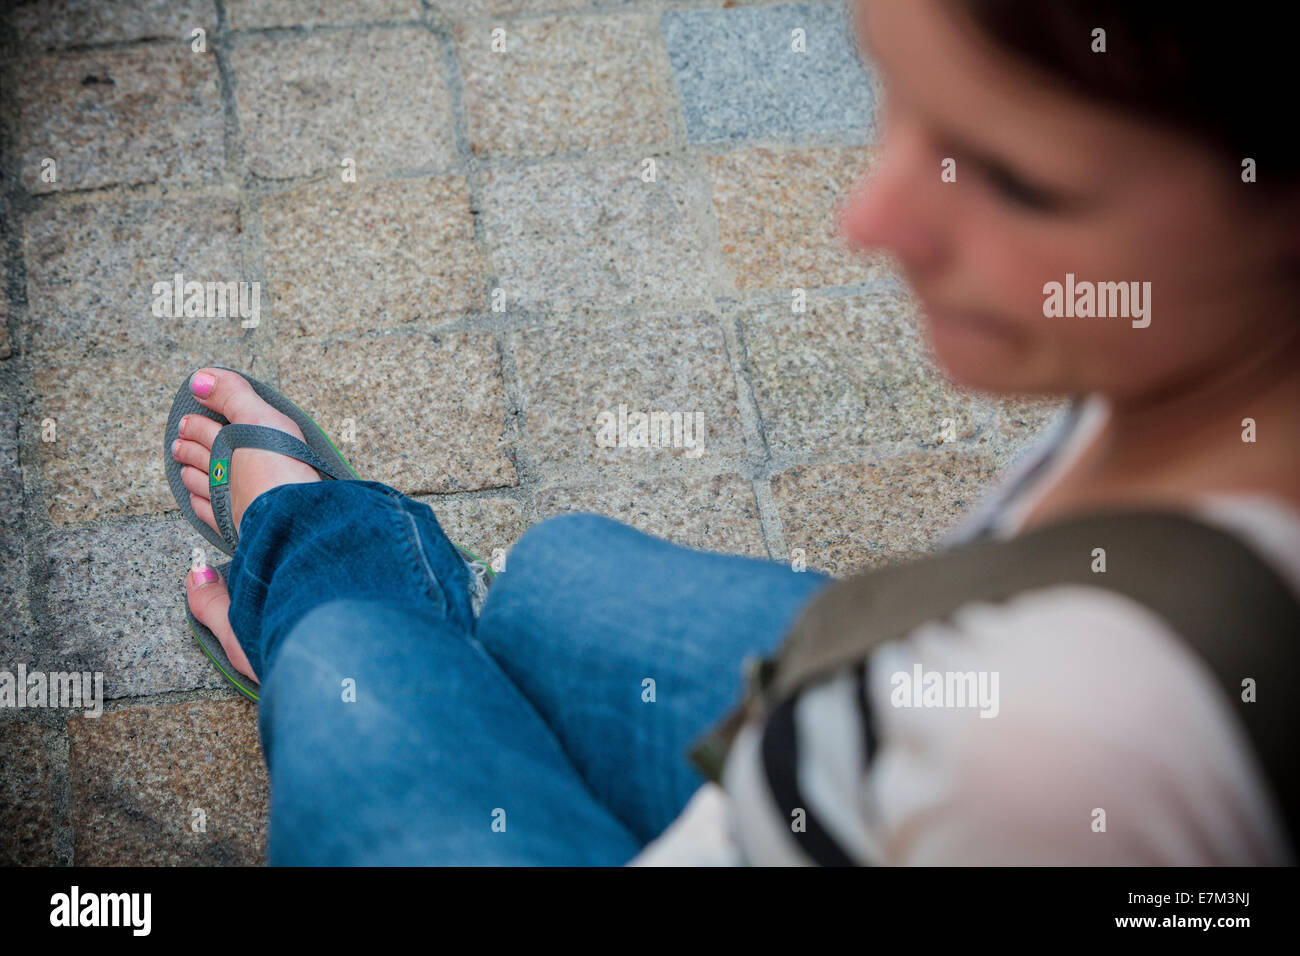 https://c8.alamy.com/comp/E7M3NJ/girl-with-nail-polish-and-flip-flop-sandals-blue-jeans-relaxing-on-E7M3NJ.jpg